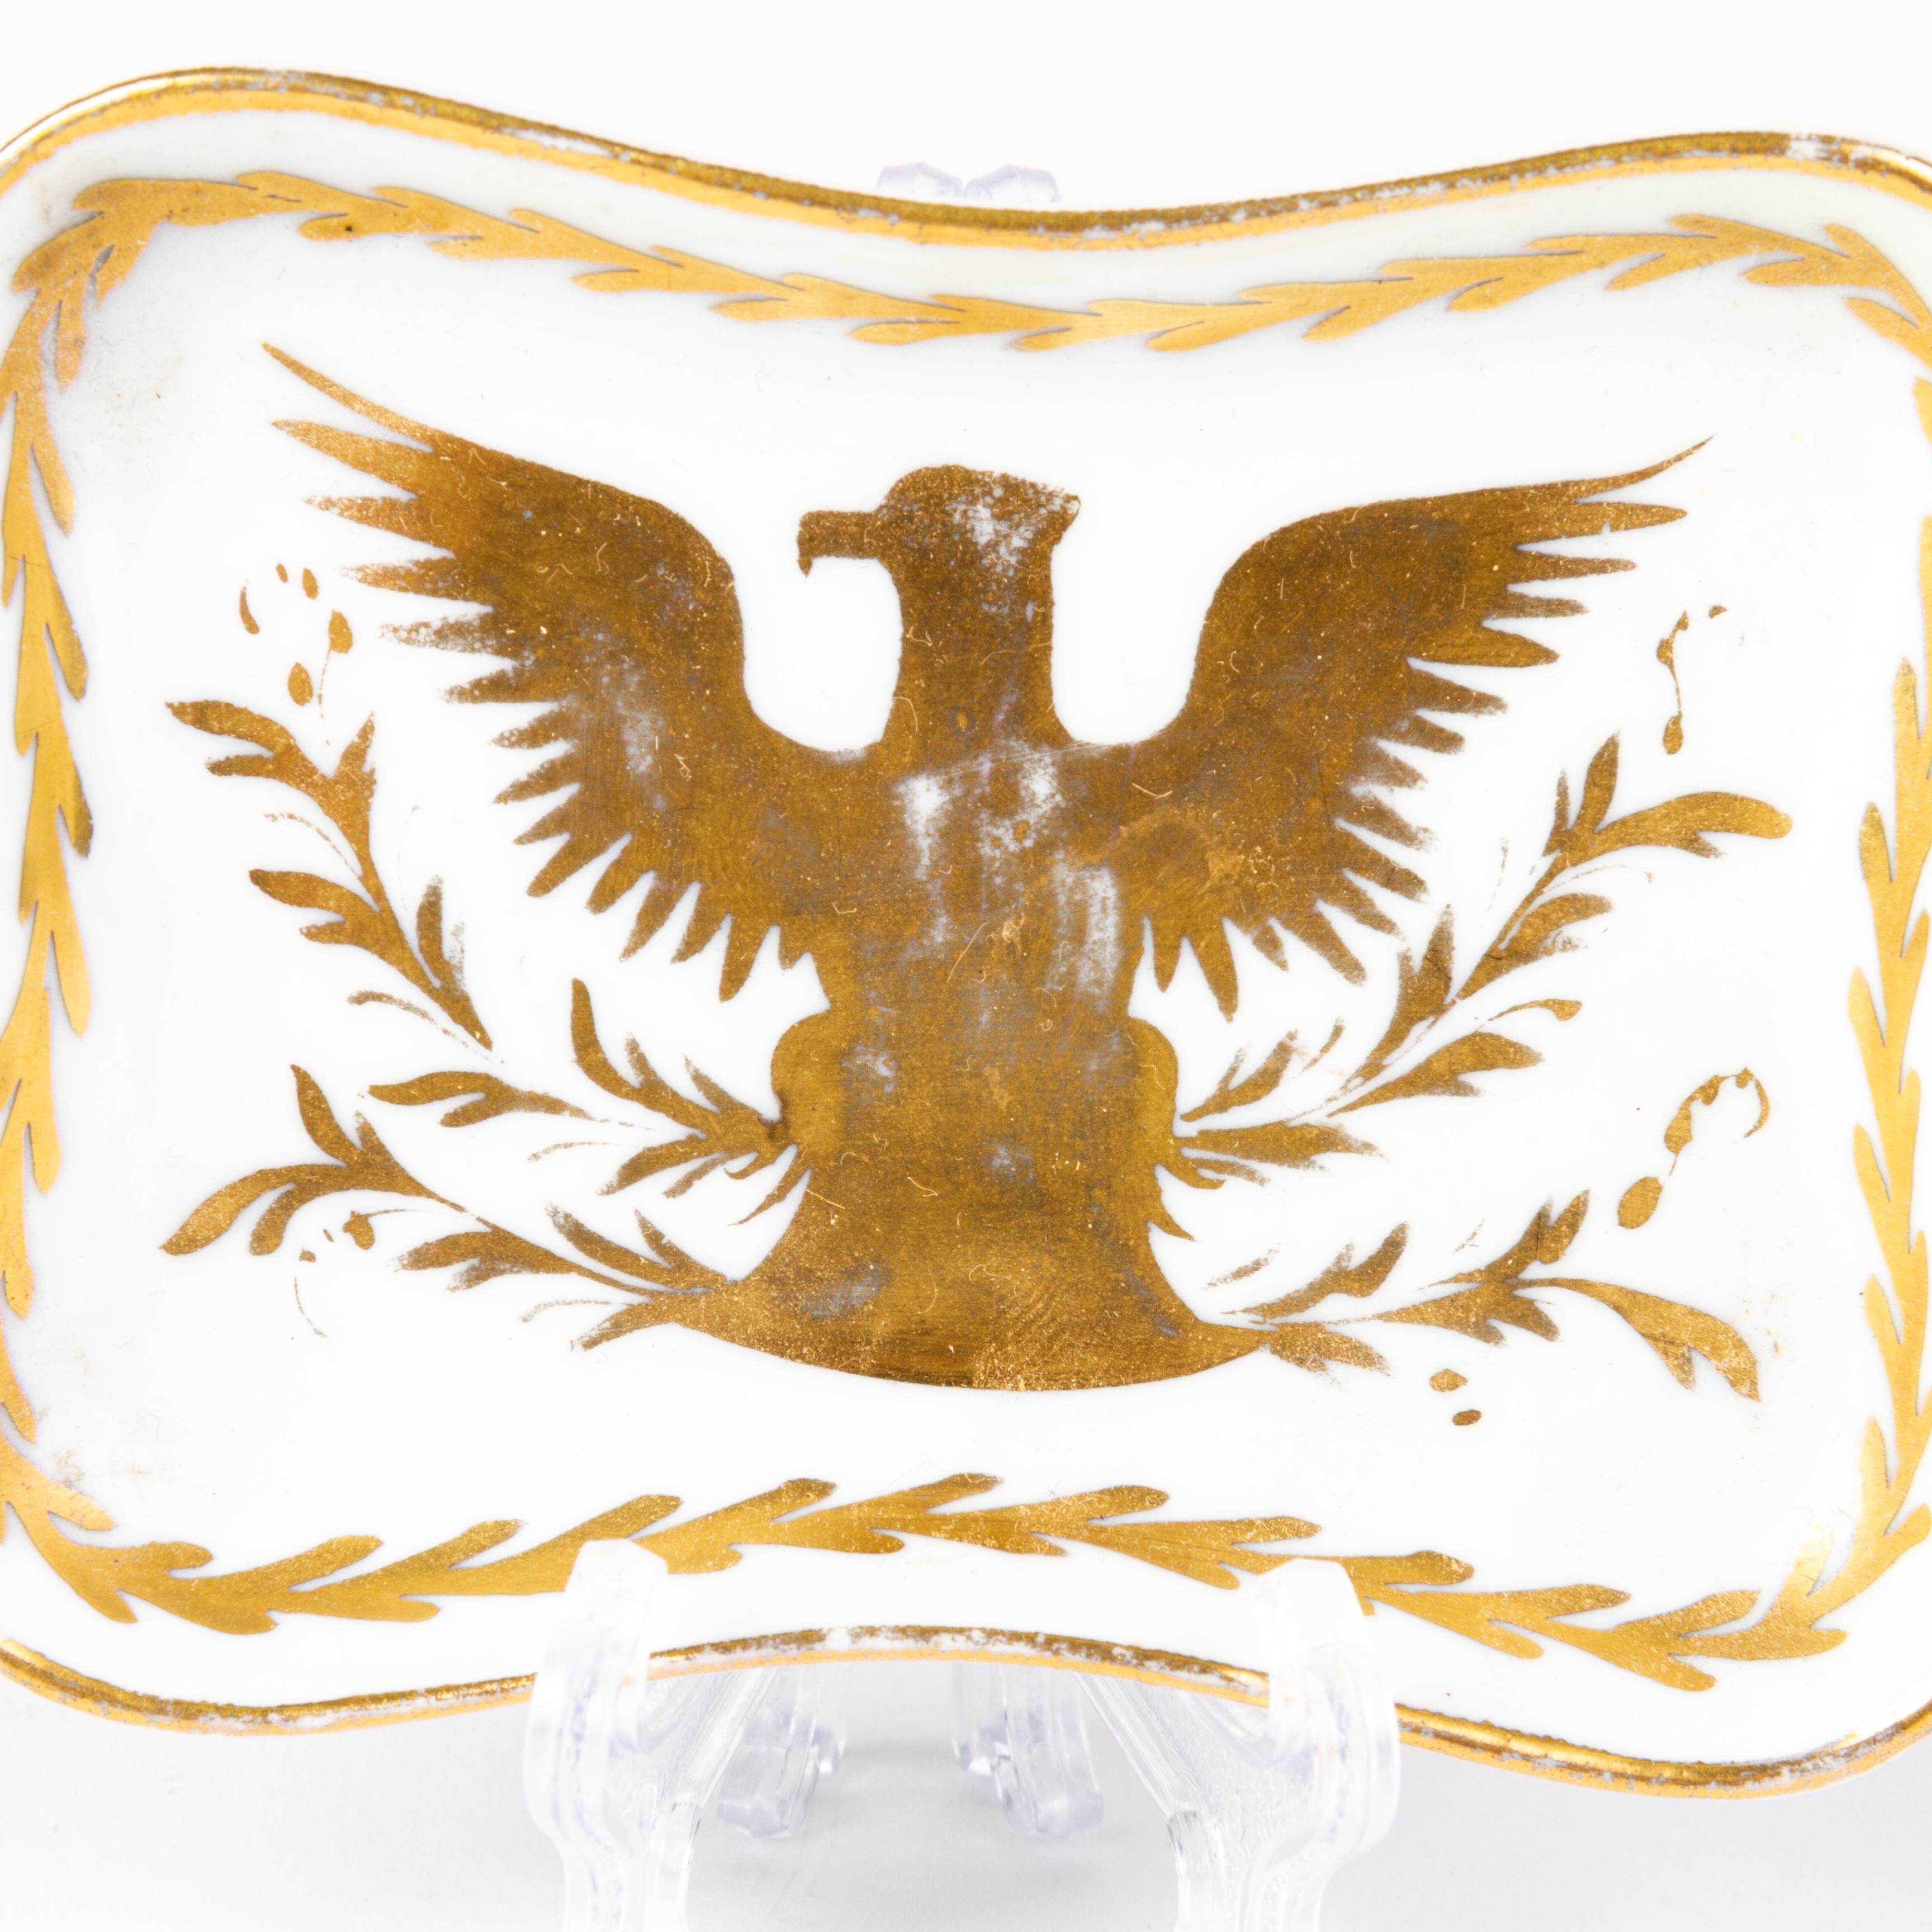 Limoges French Napoleonic Vincennes Fine Gilt Porcelain Dish Tray
Good condition, some light fading to gilt eagle
From a private collection.
Free international shipping.